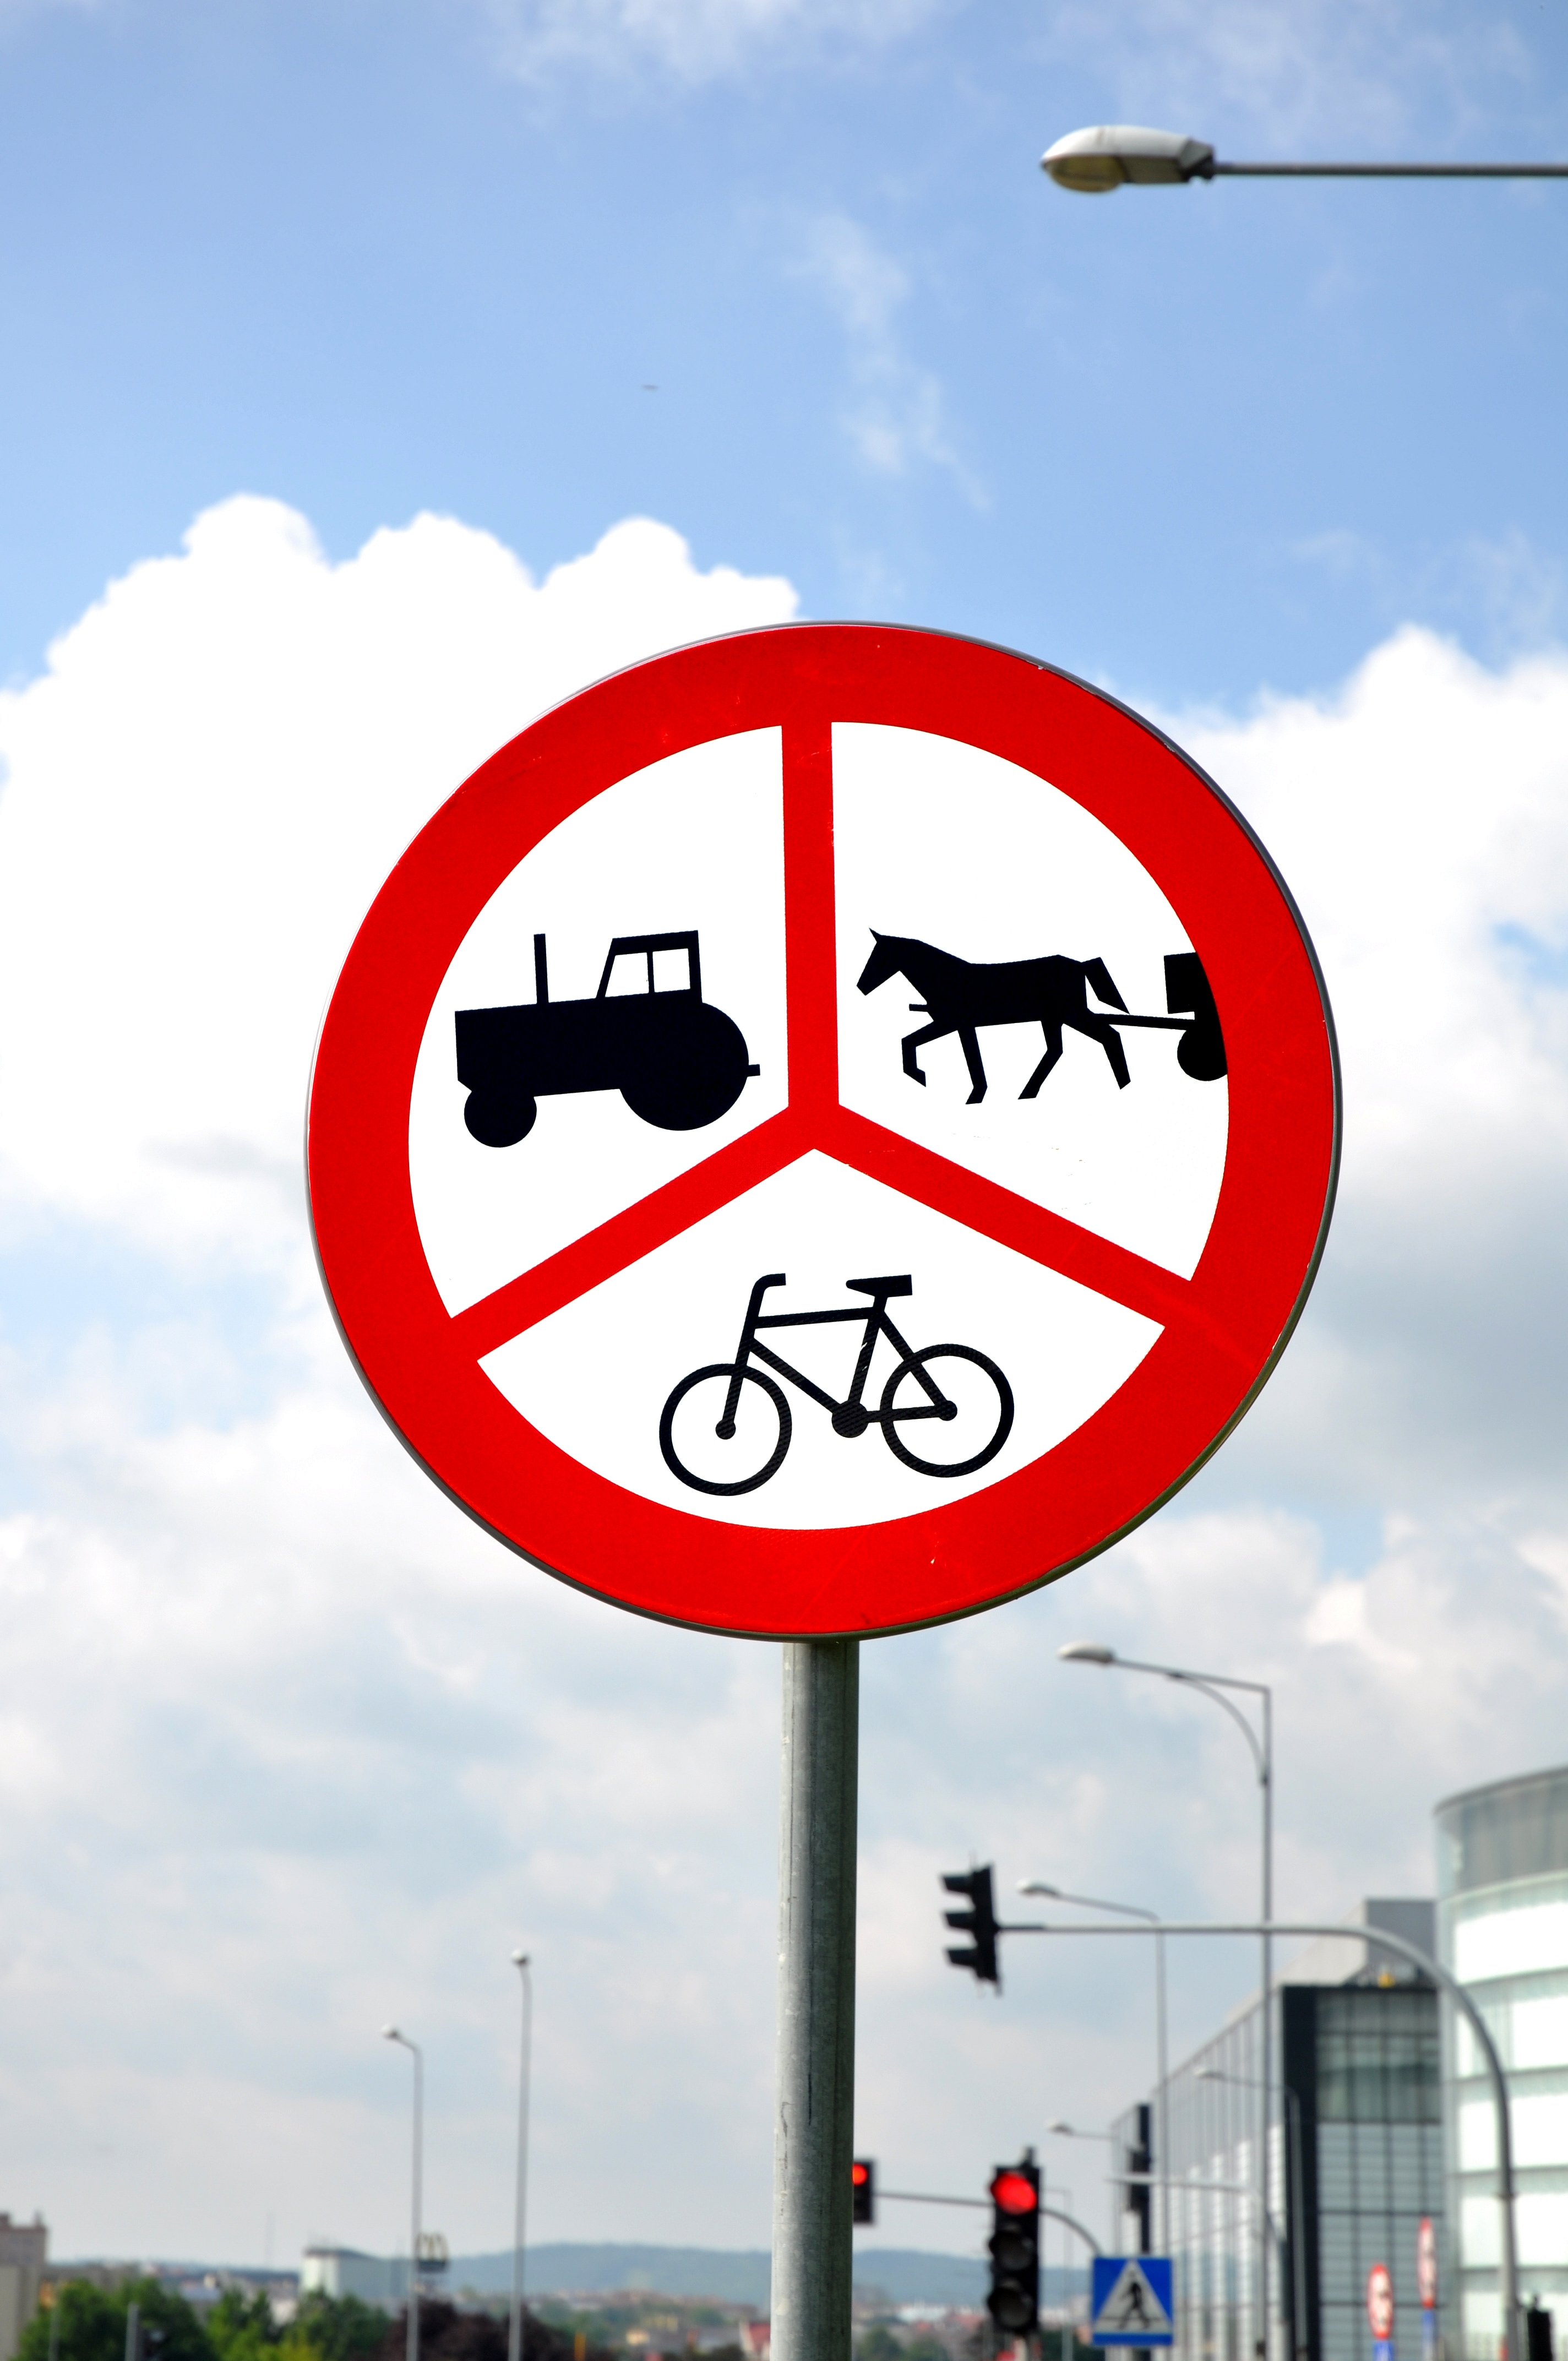 I’m guessing this sign bans tractors, horses and carts, and bicycles?! (Source: Shutterstock)